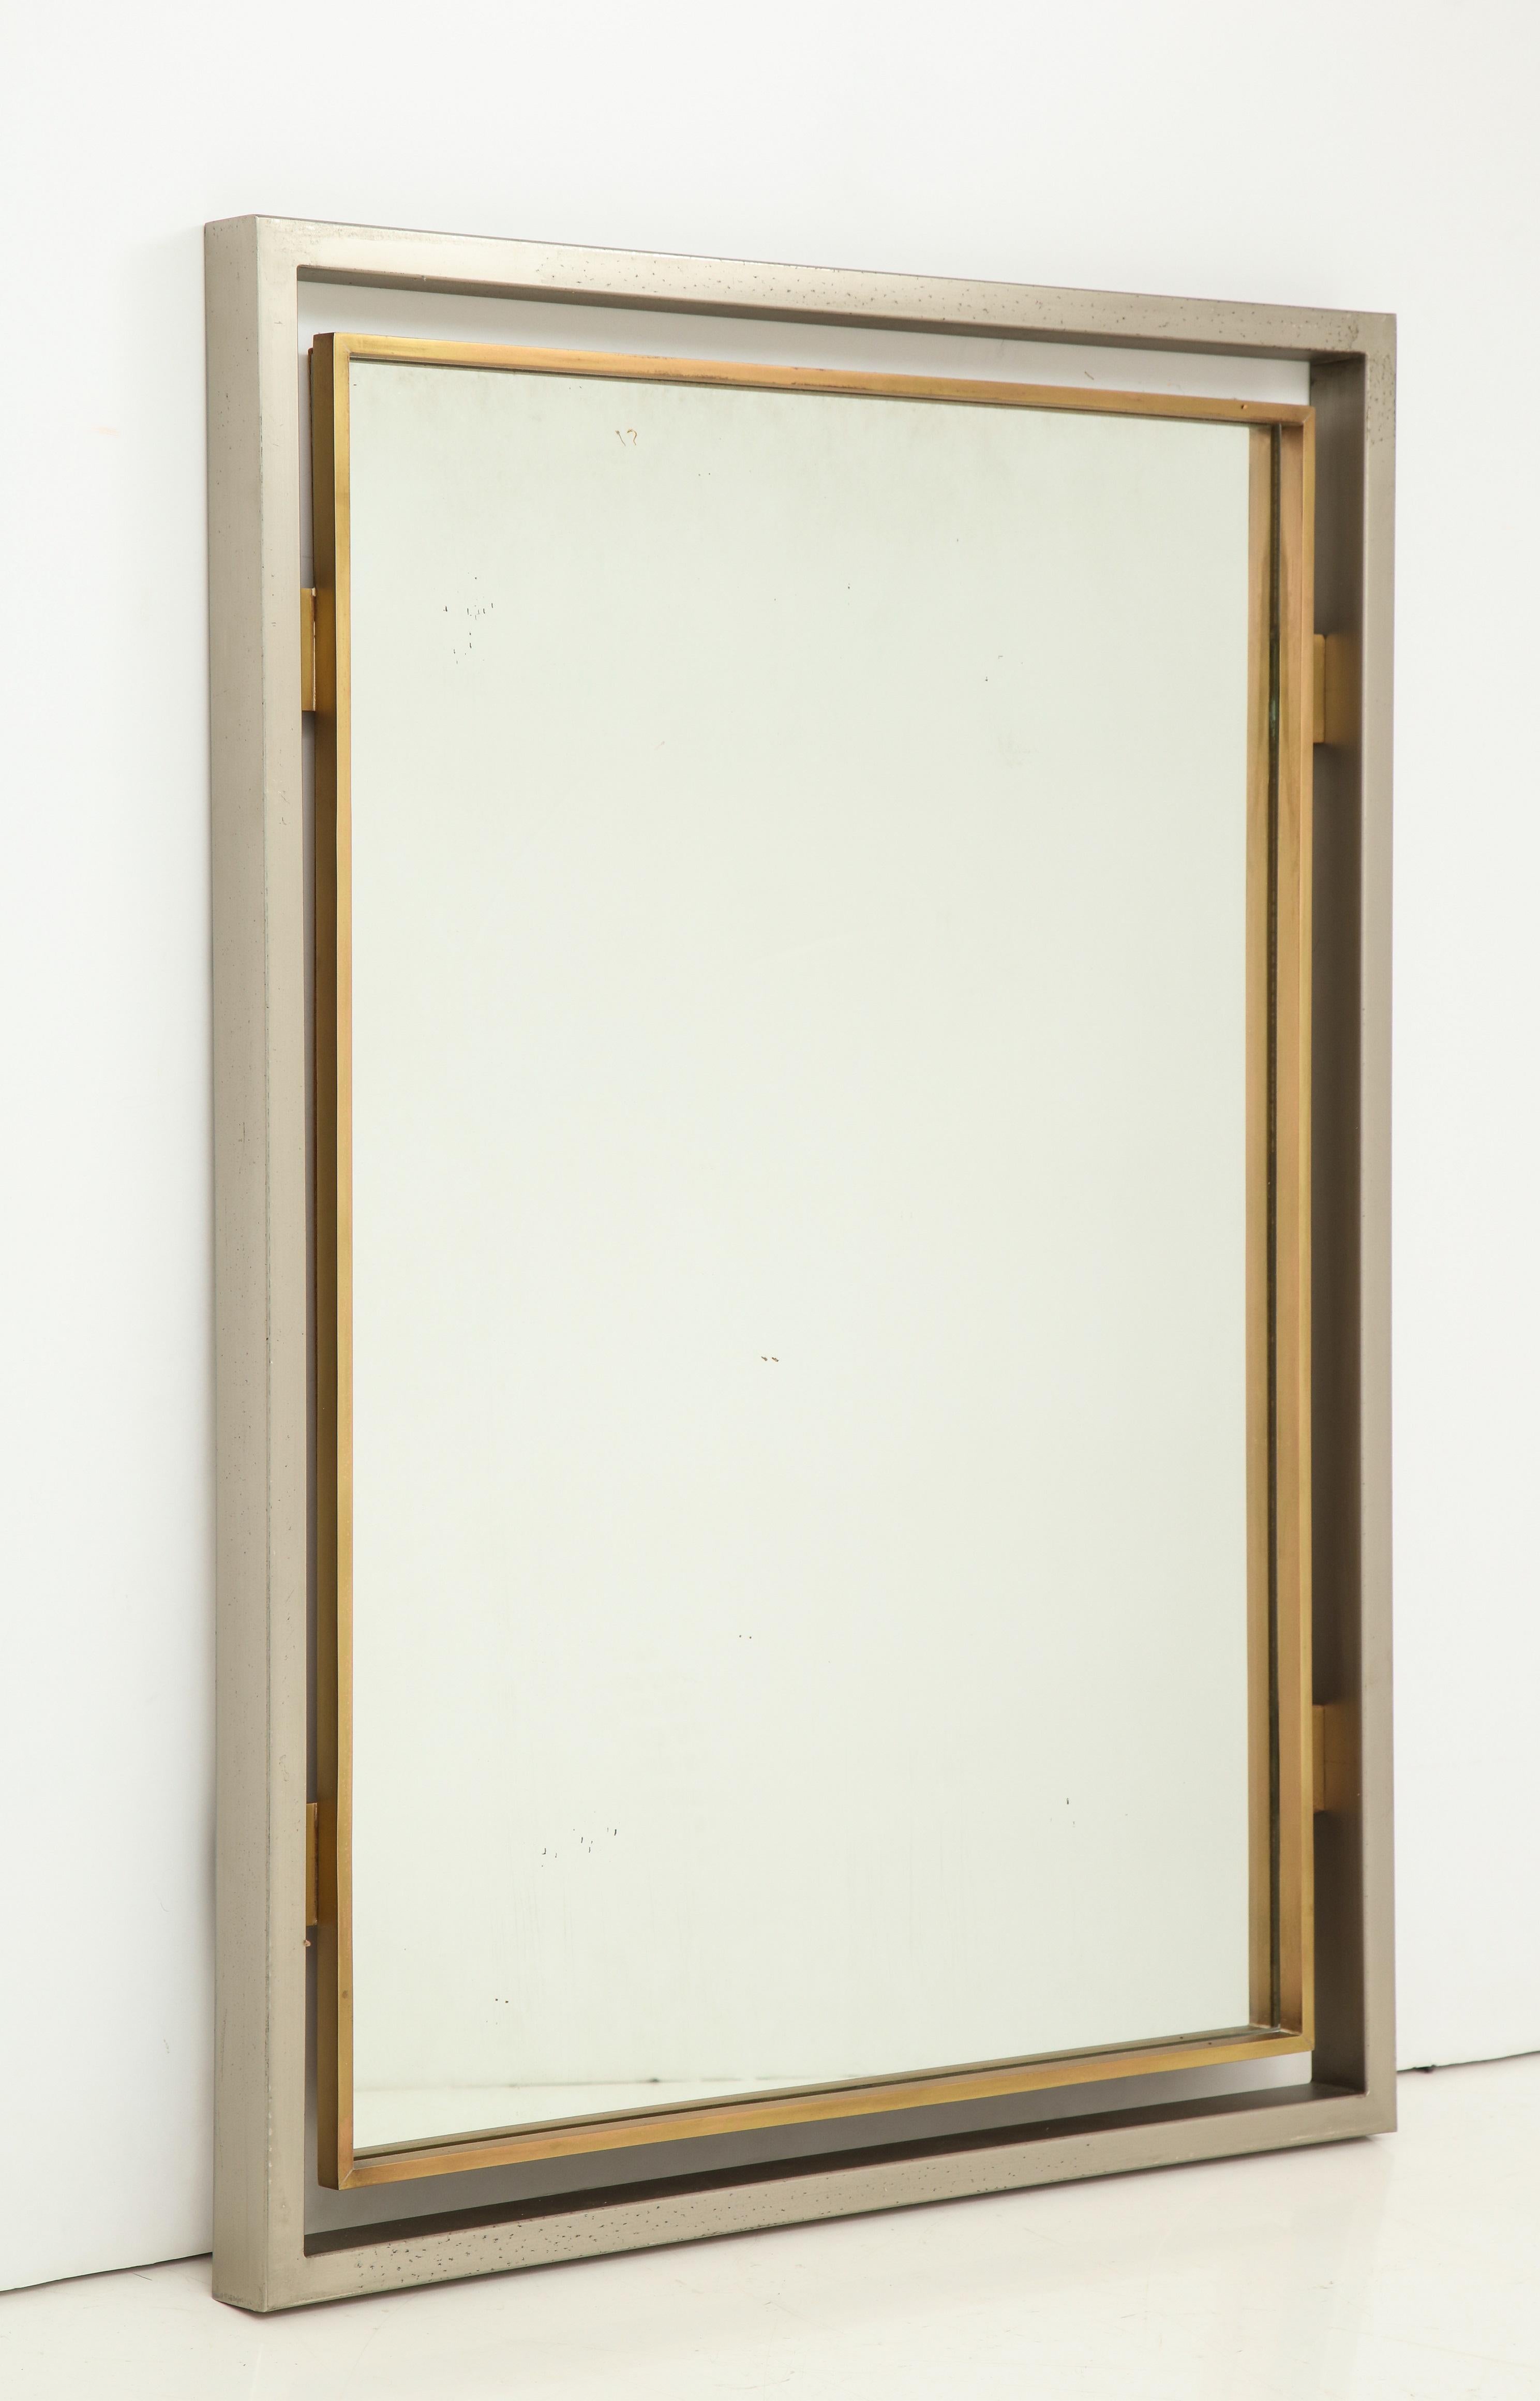 Plated French 1970s Modernist Mirror by Guy Lefevre for Maison Jansen For Sale